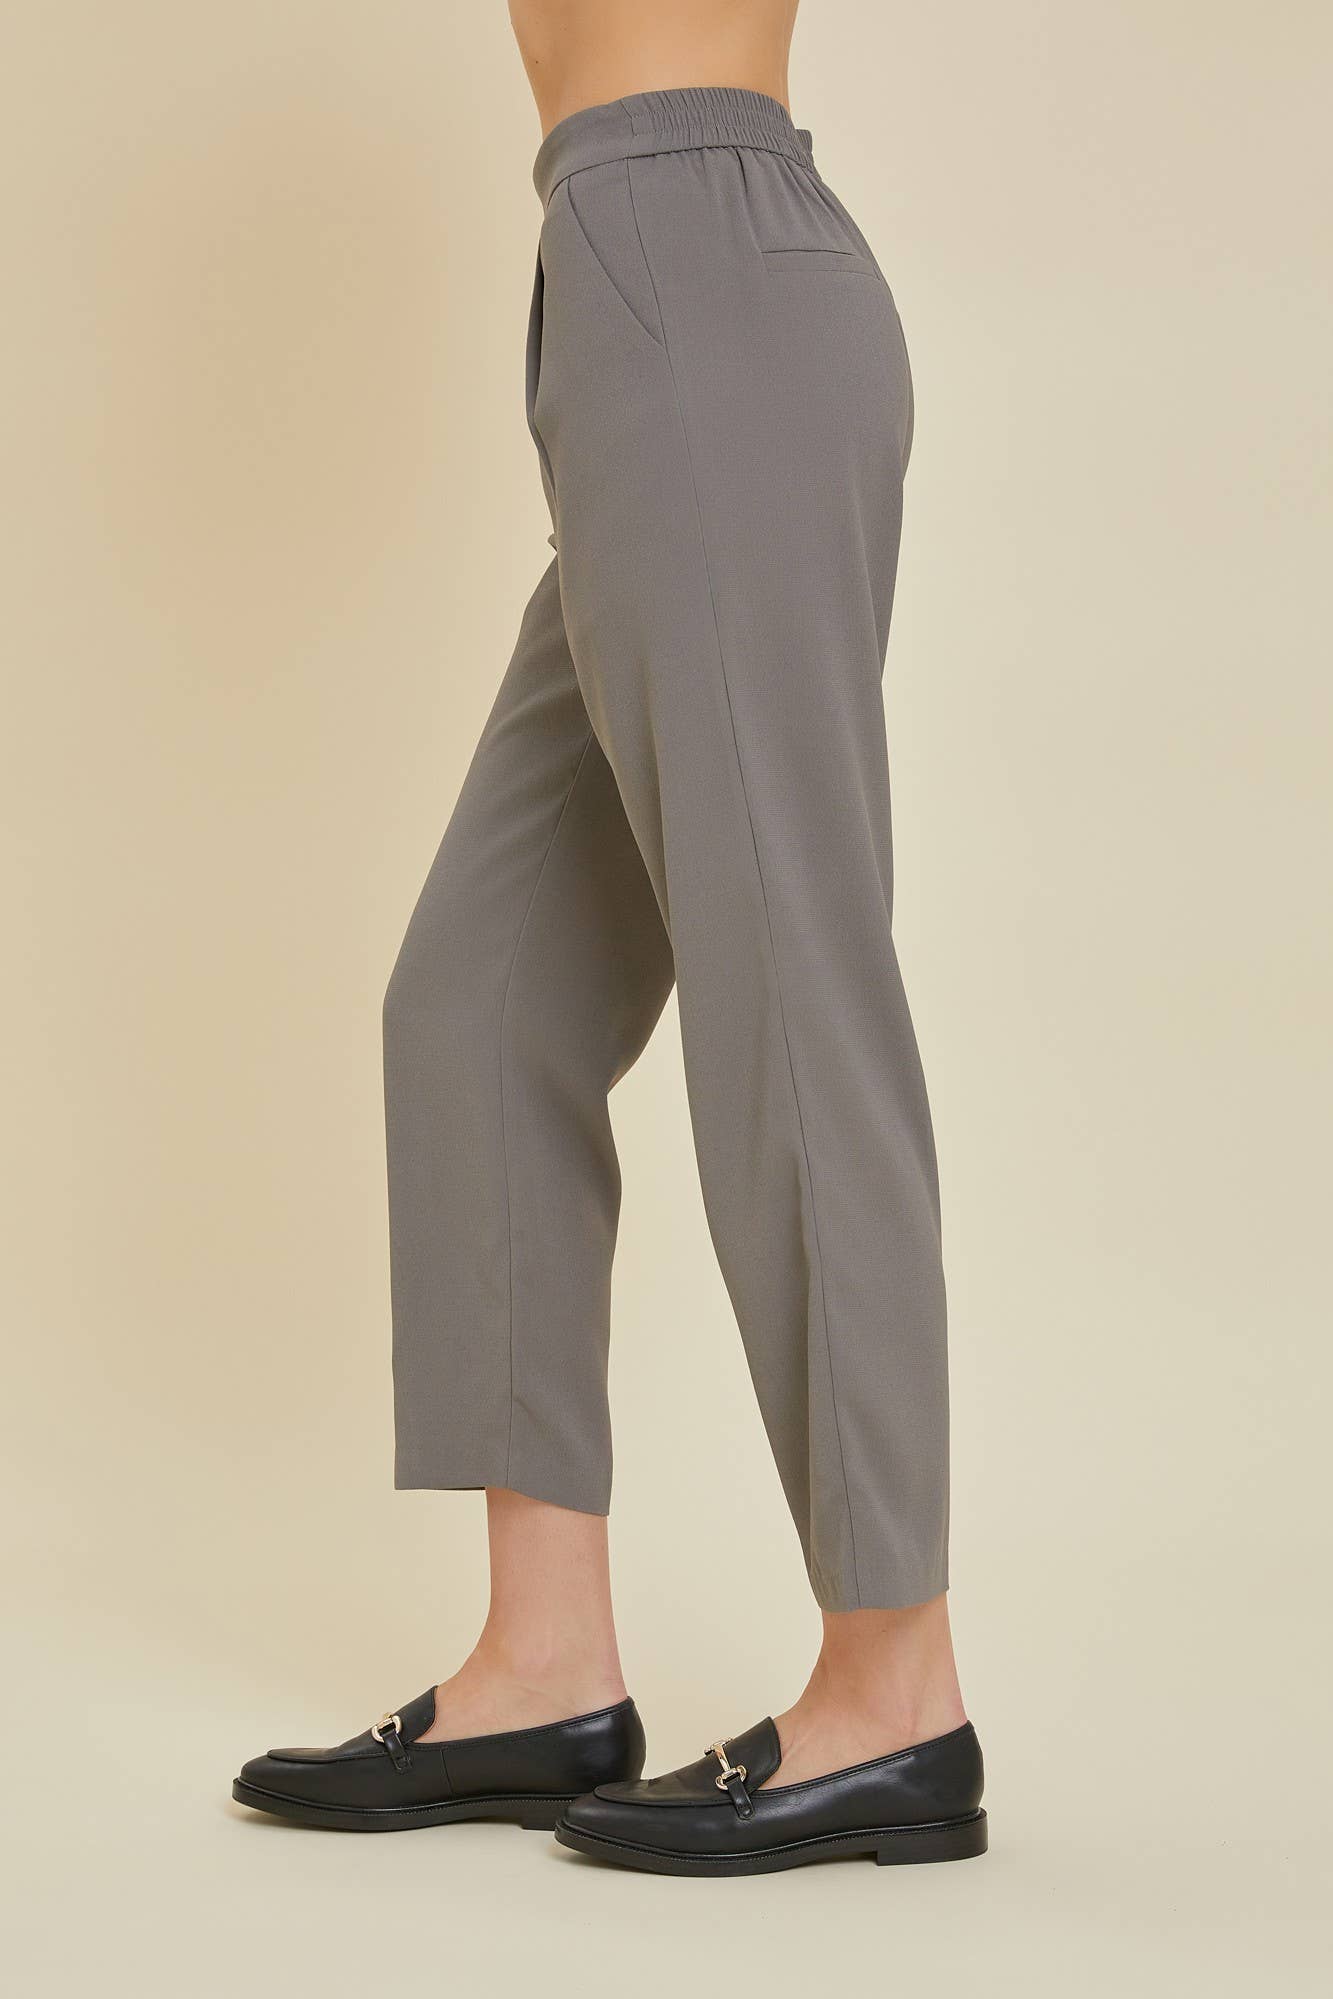 The Anywhere Trousers